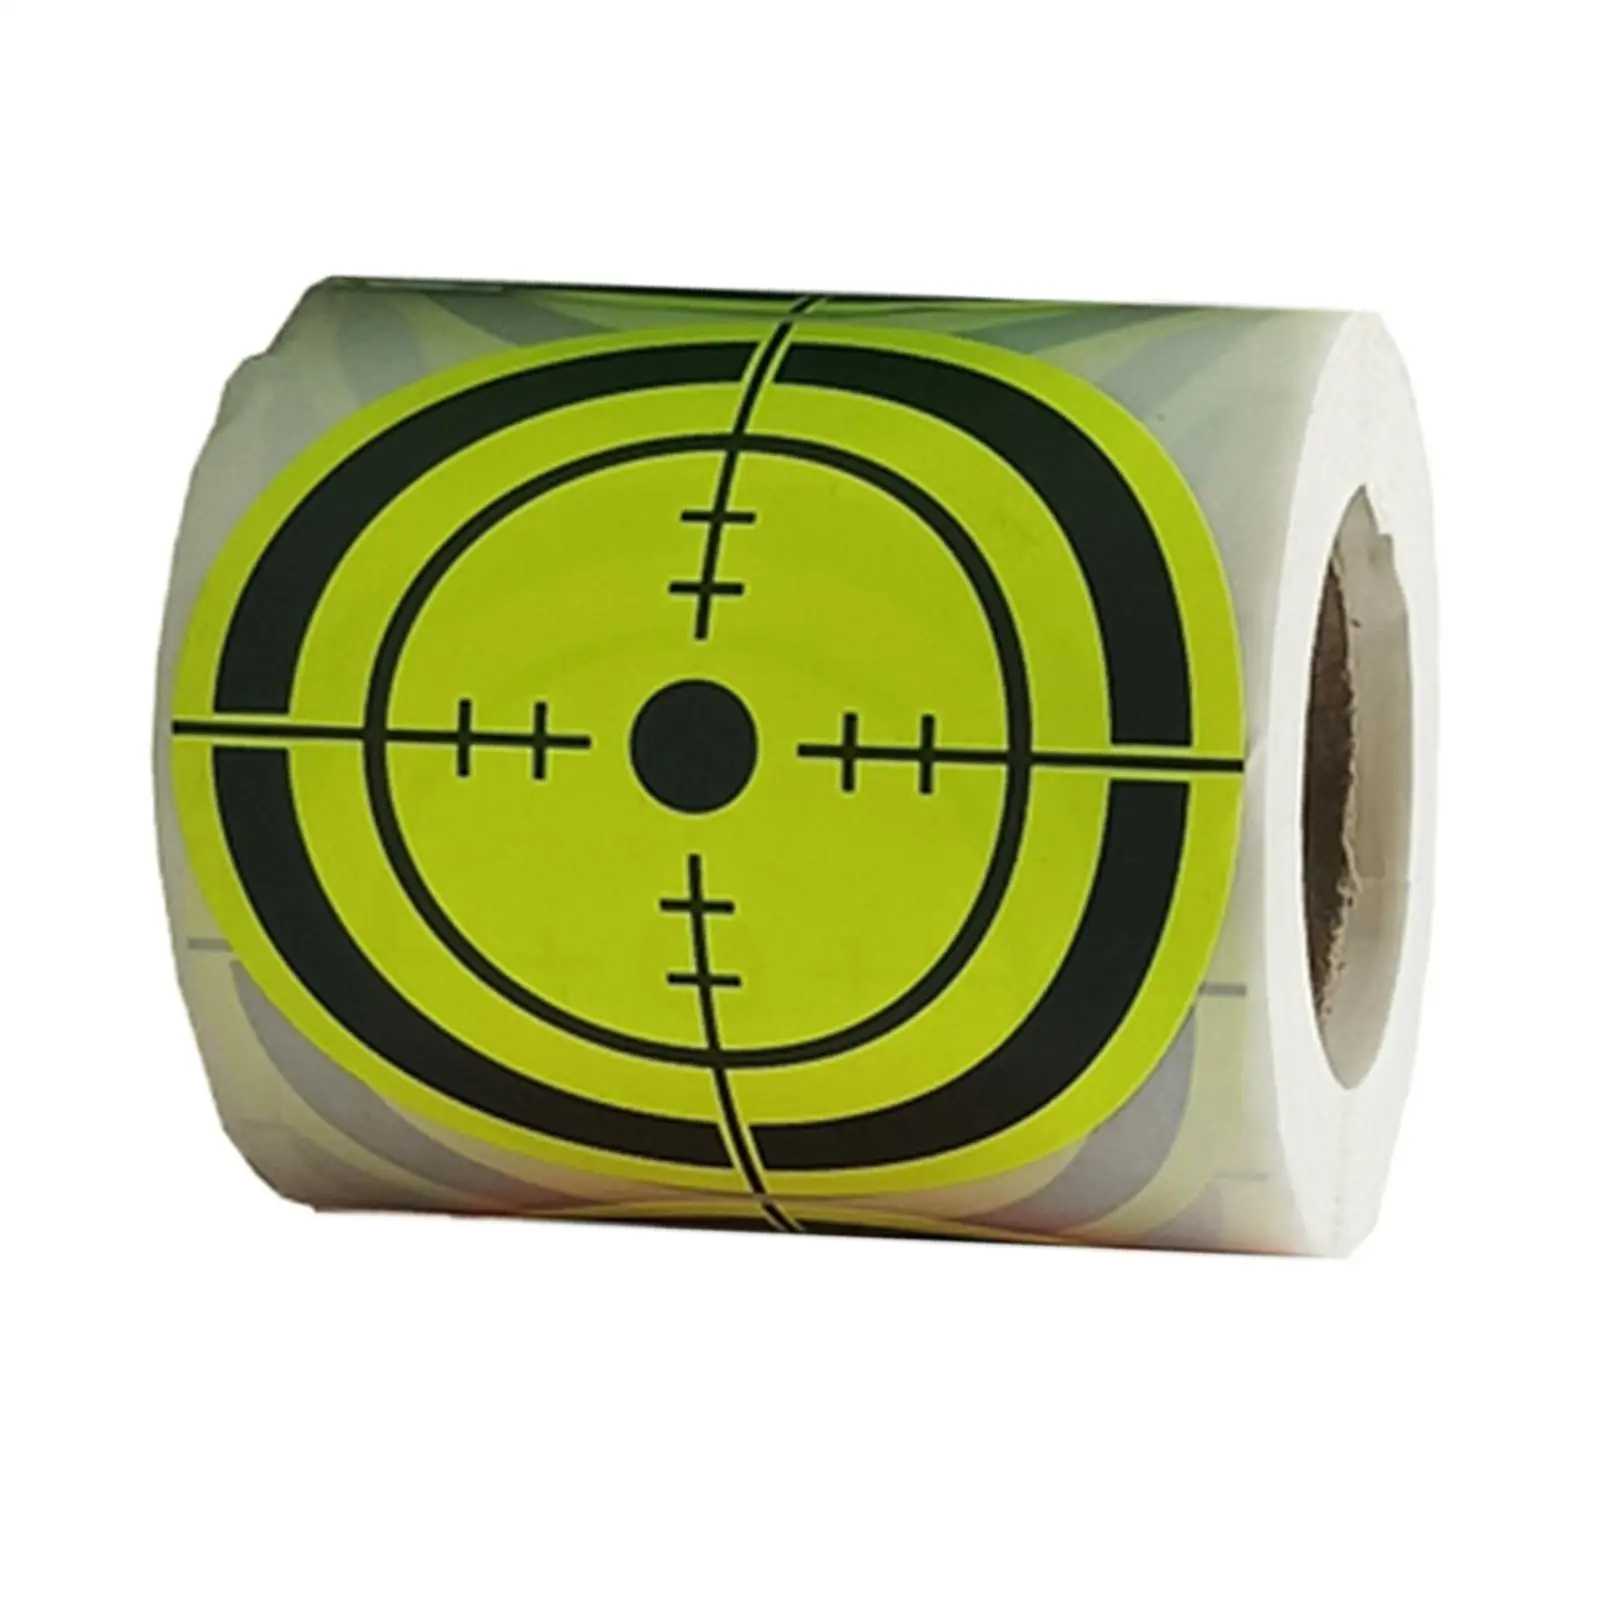 200 Pieces Adhesive Target Stickers High Visibility